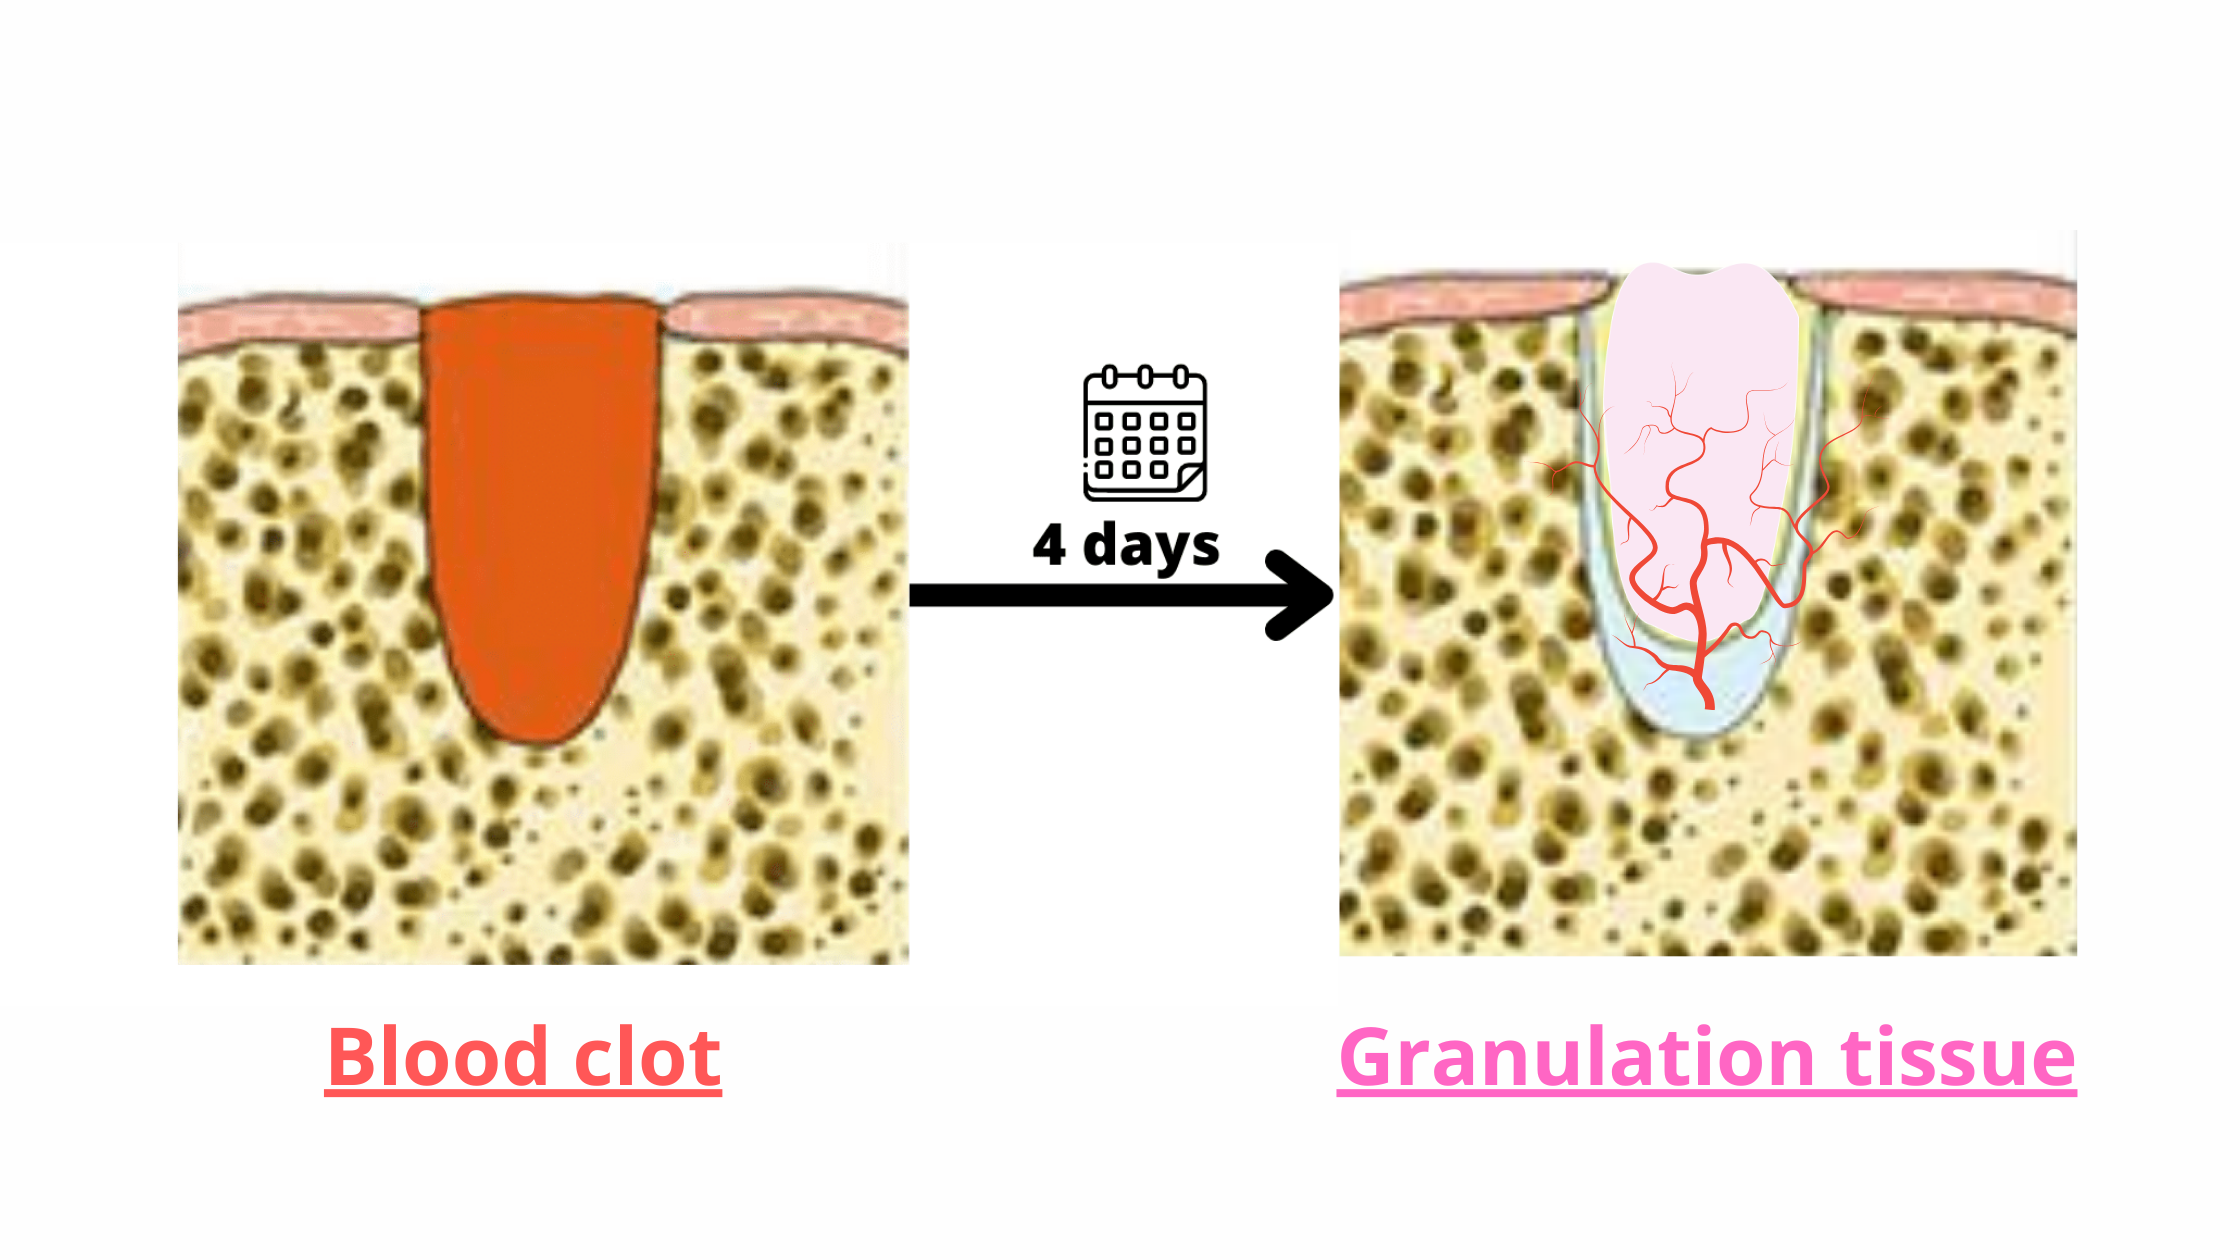 the blood clot turns into granulation tissue after about 3-4 days